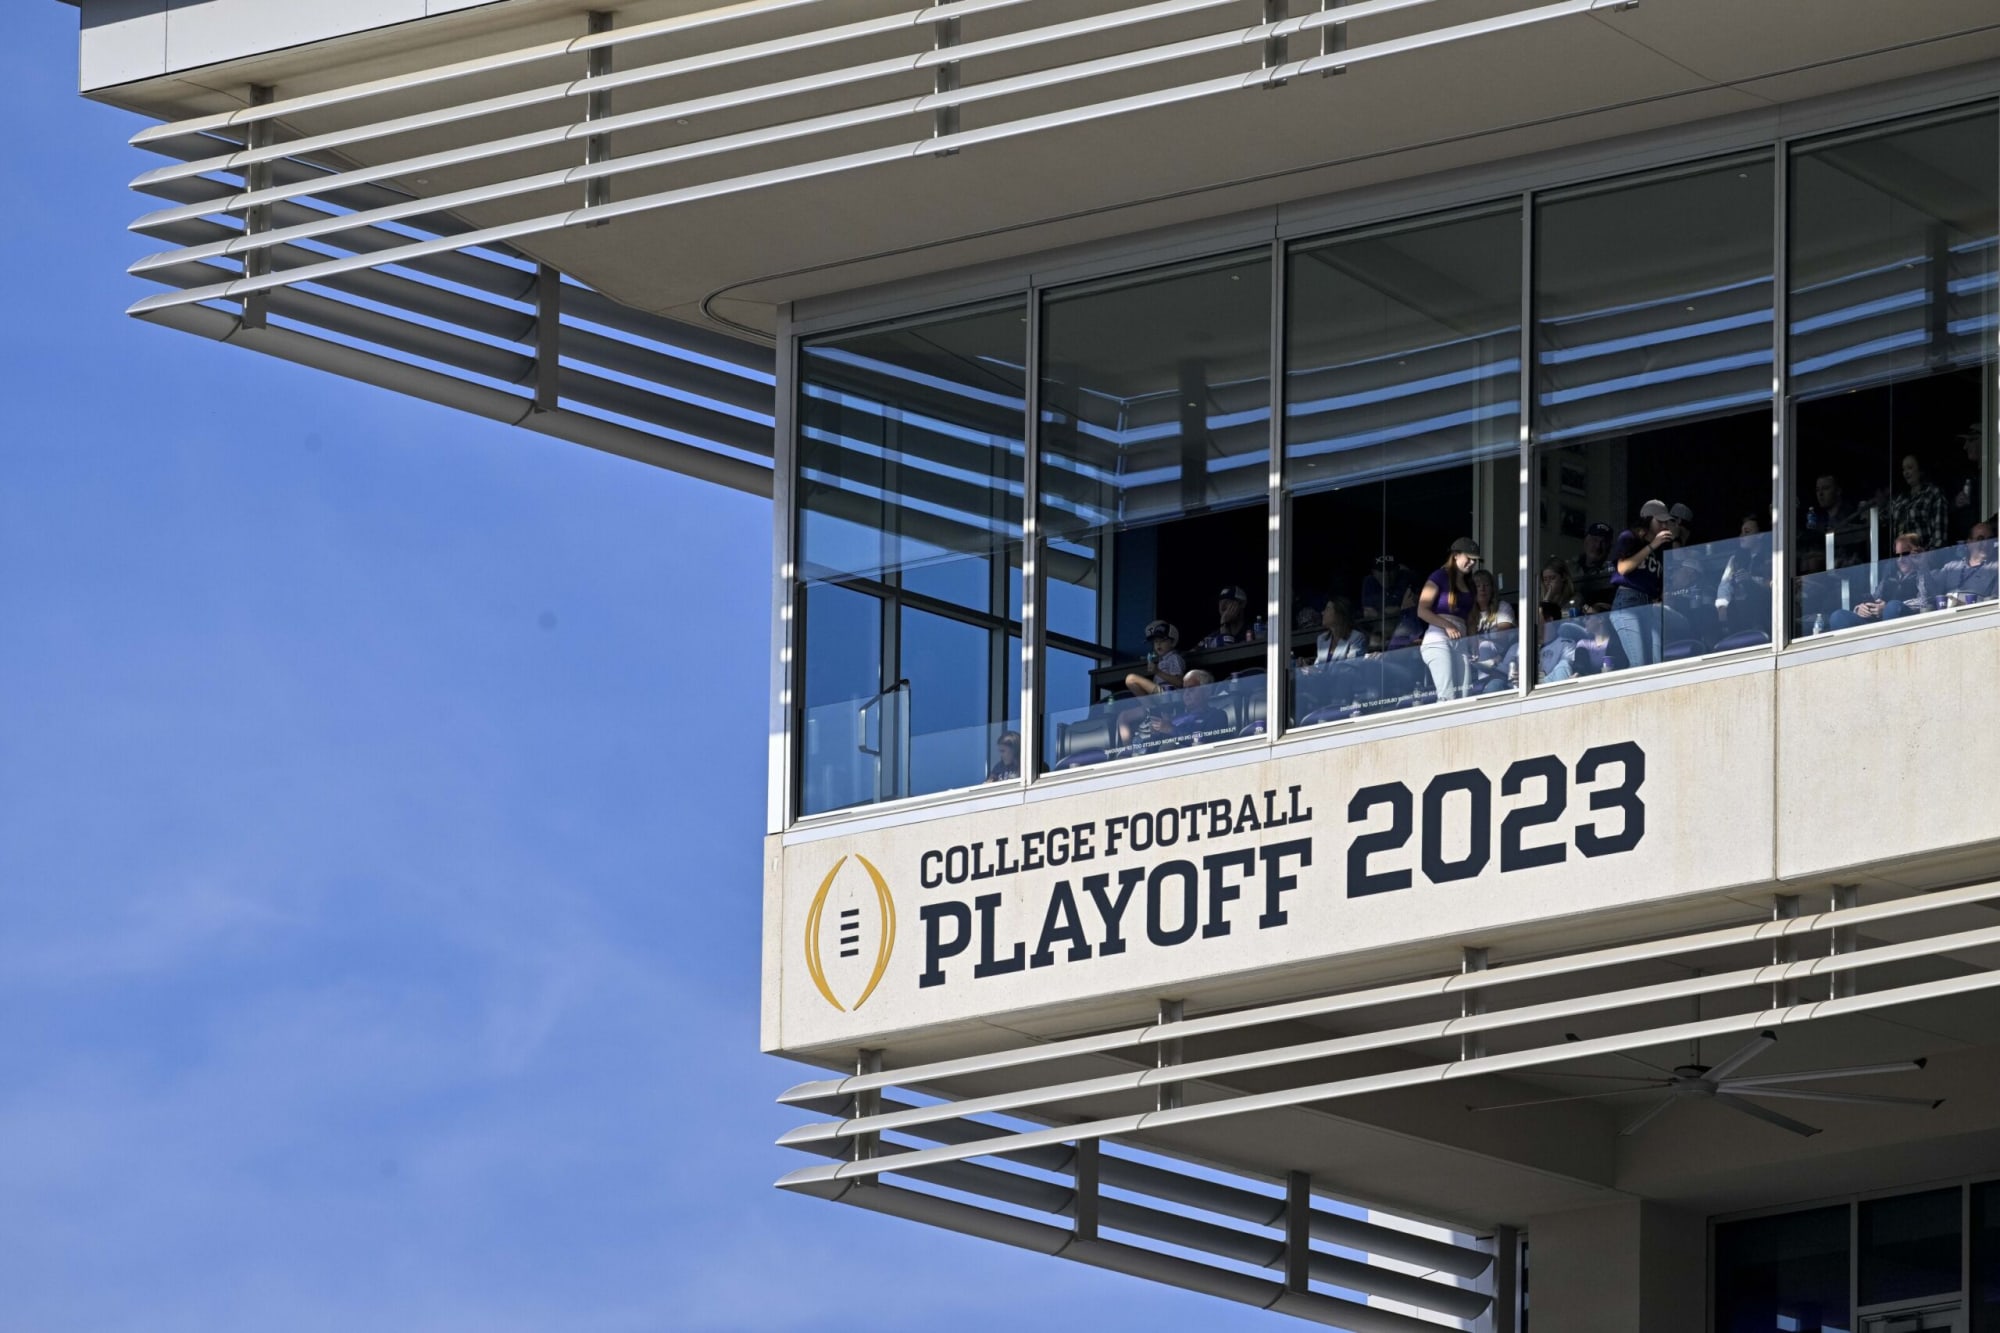 How a 12-team CFP would go in '22 (Some upsets, but Georgia rules)